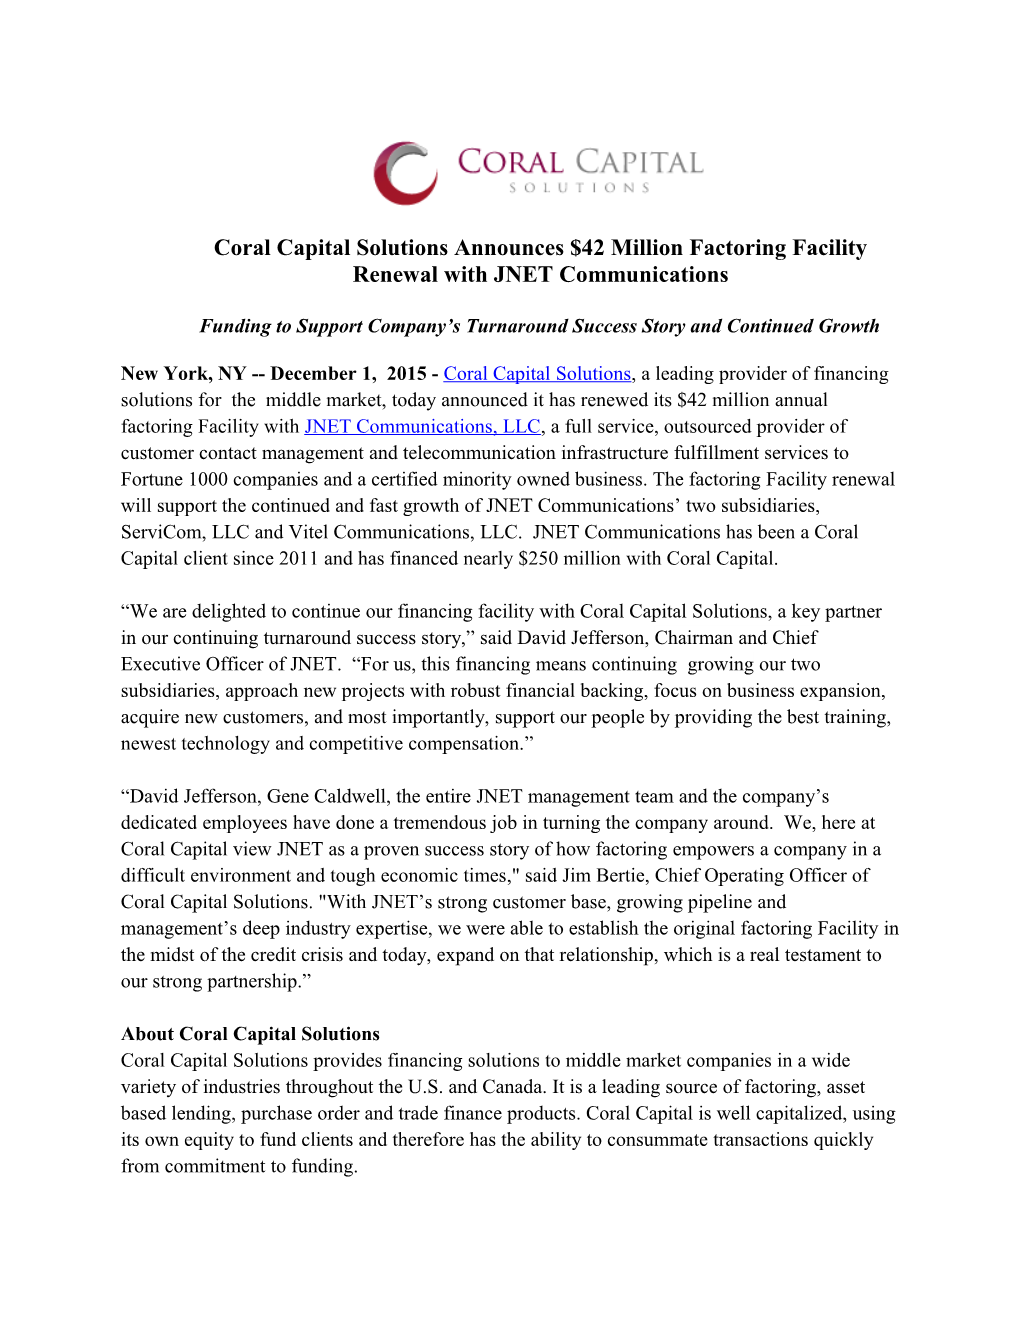 Coral Capital Solutions Announces $42 Million Factoring Facility Renewal with JNET